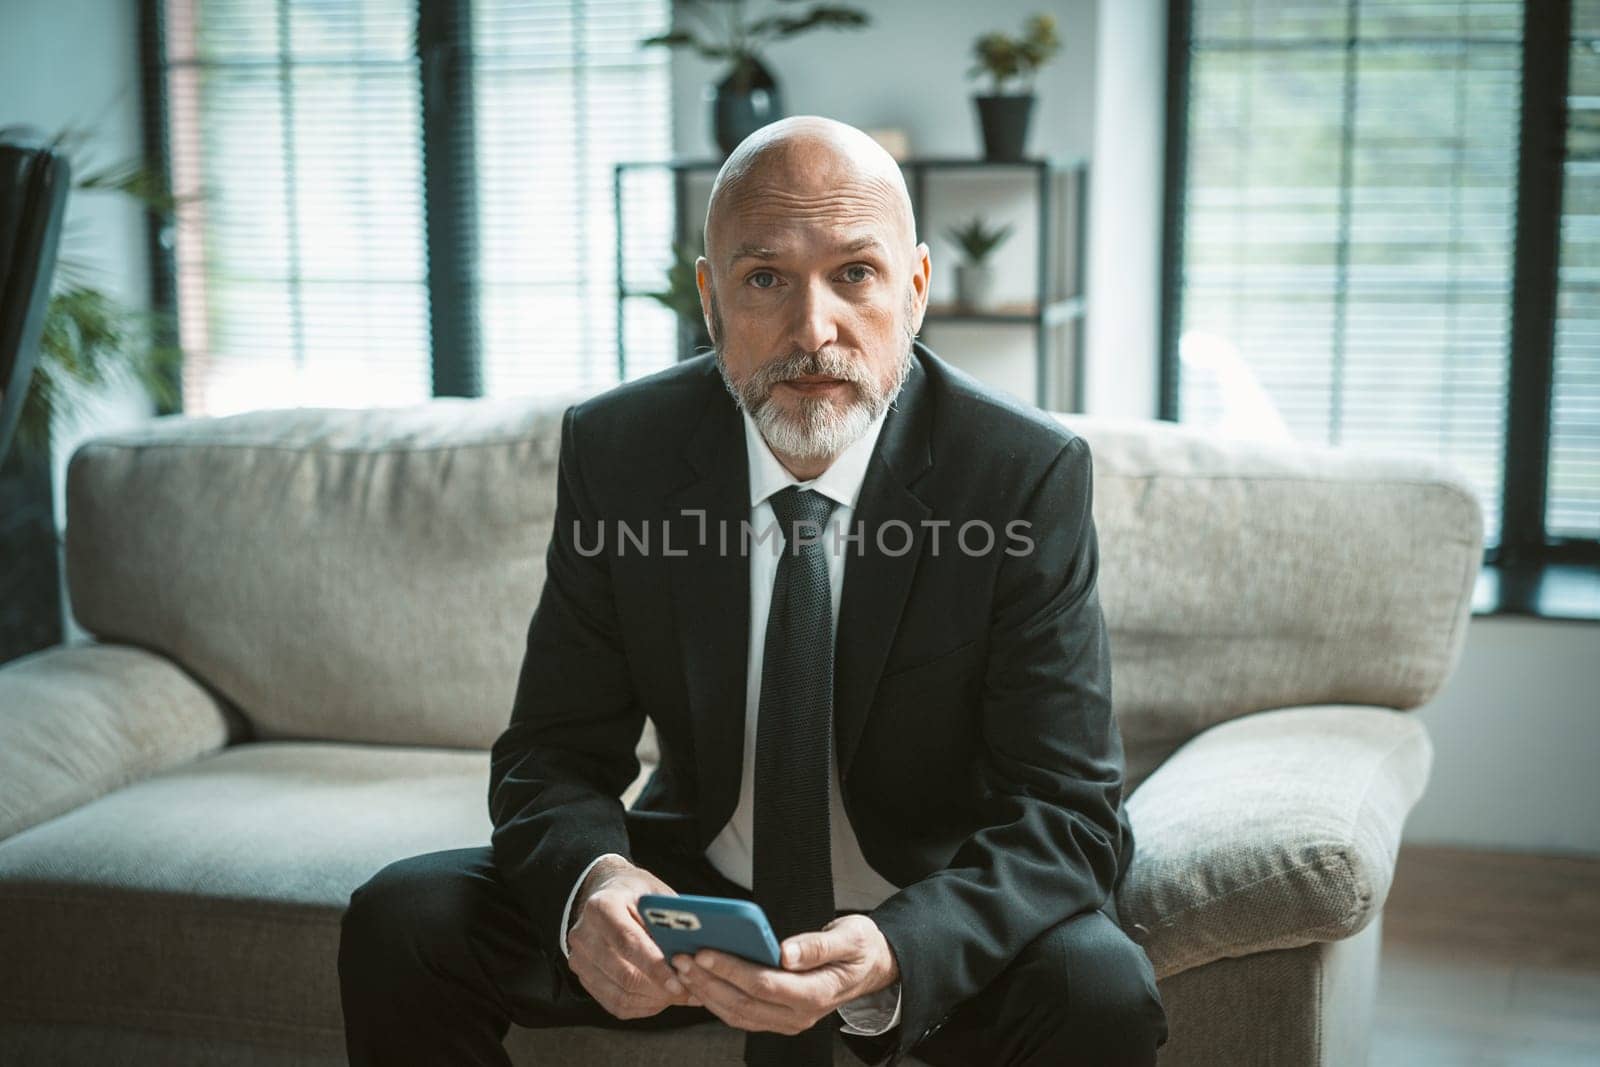 Senior, mature man browsing internet in search of work of job. Essence of career exploration and evolving job market, as senior businessman utilizes digital devices to navigate world of employment. . High quality photo